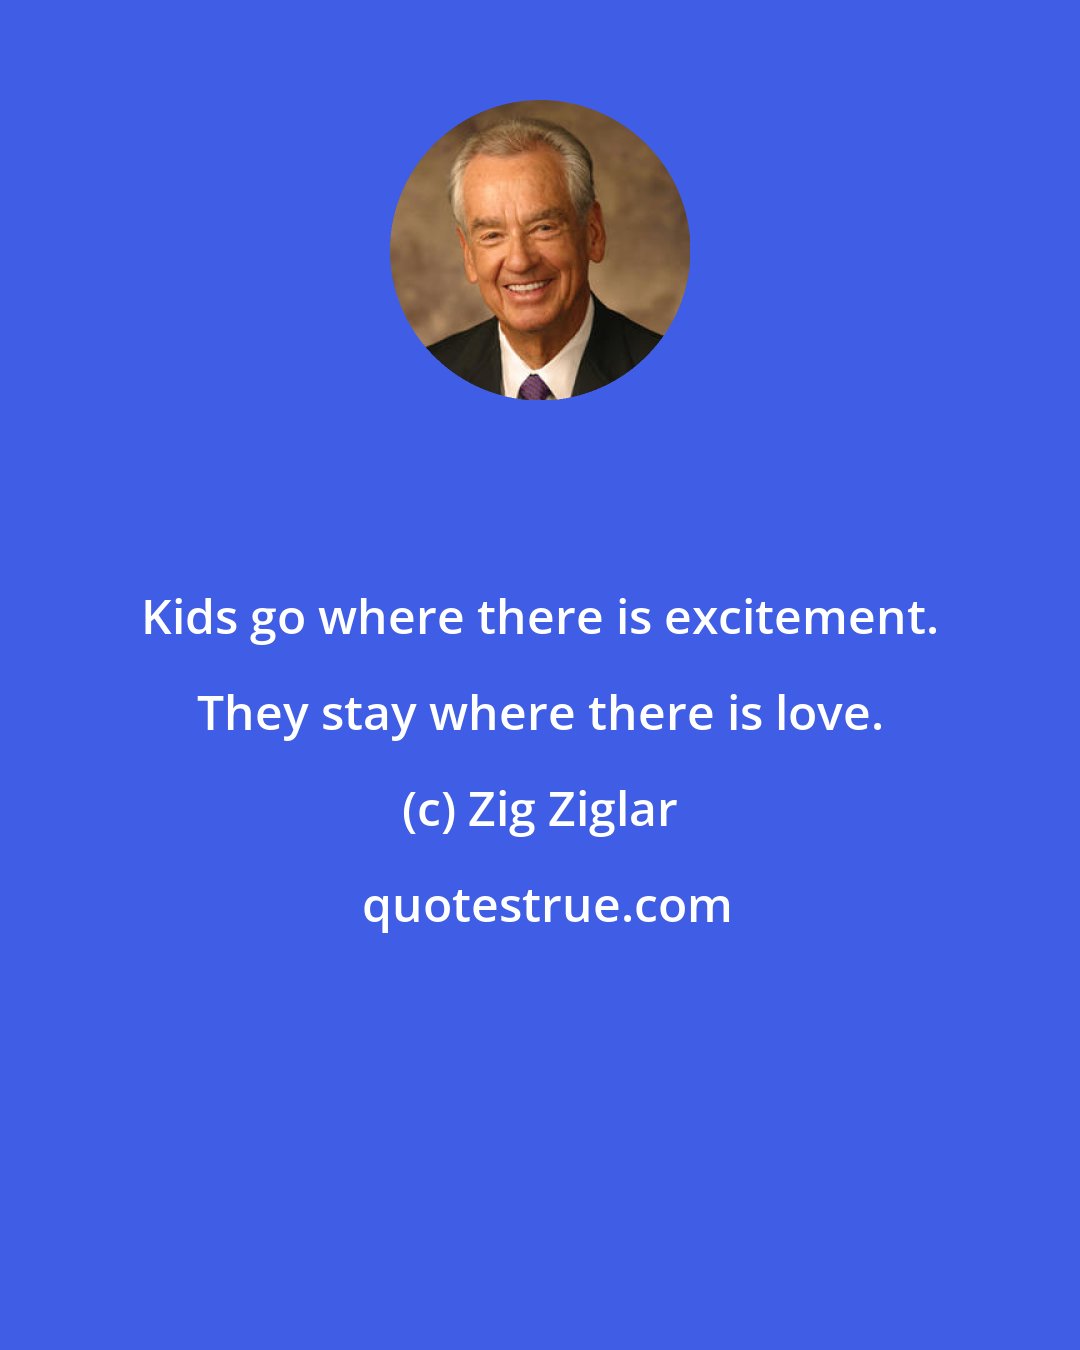 Zig Ziglar: Kids go where there is excitement. They stay where there is love.